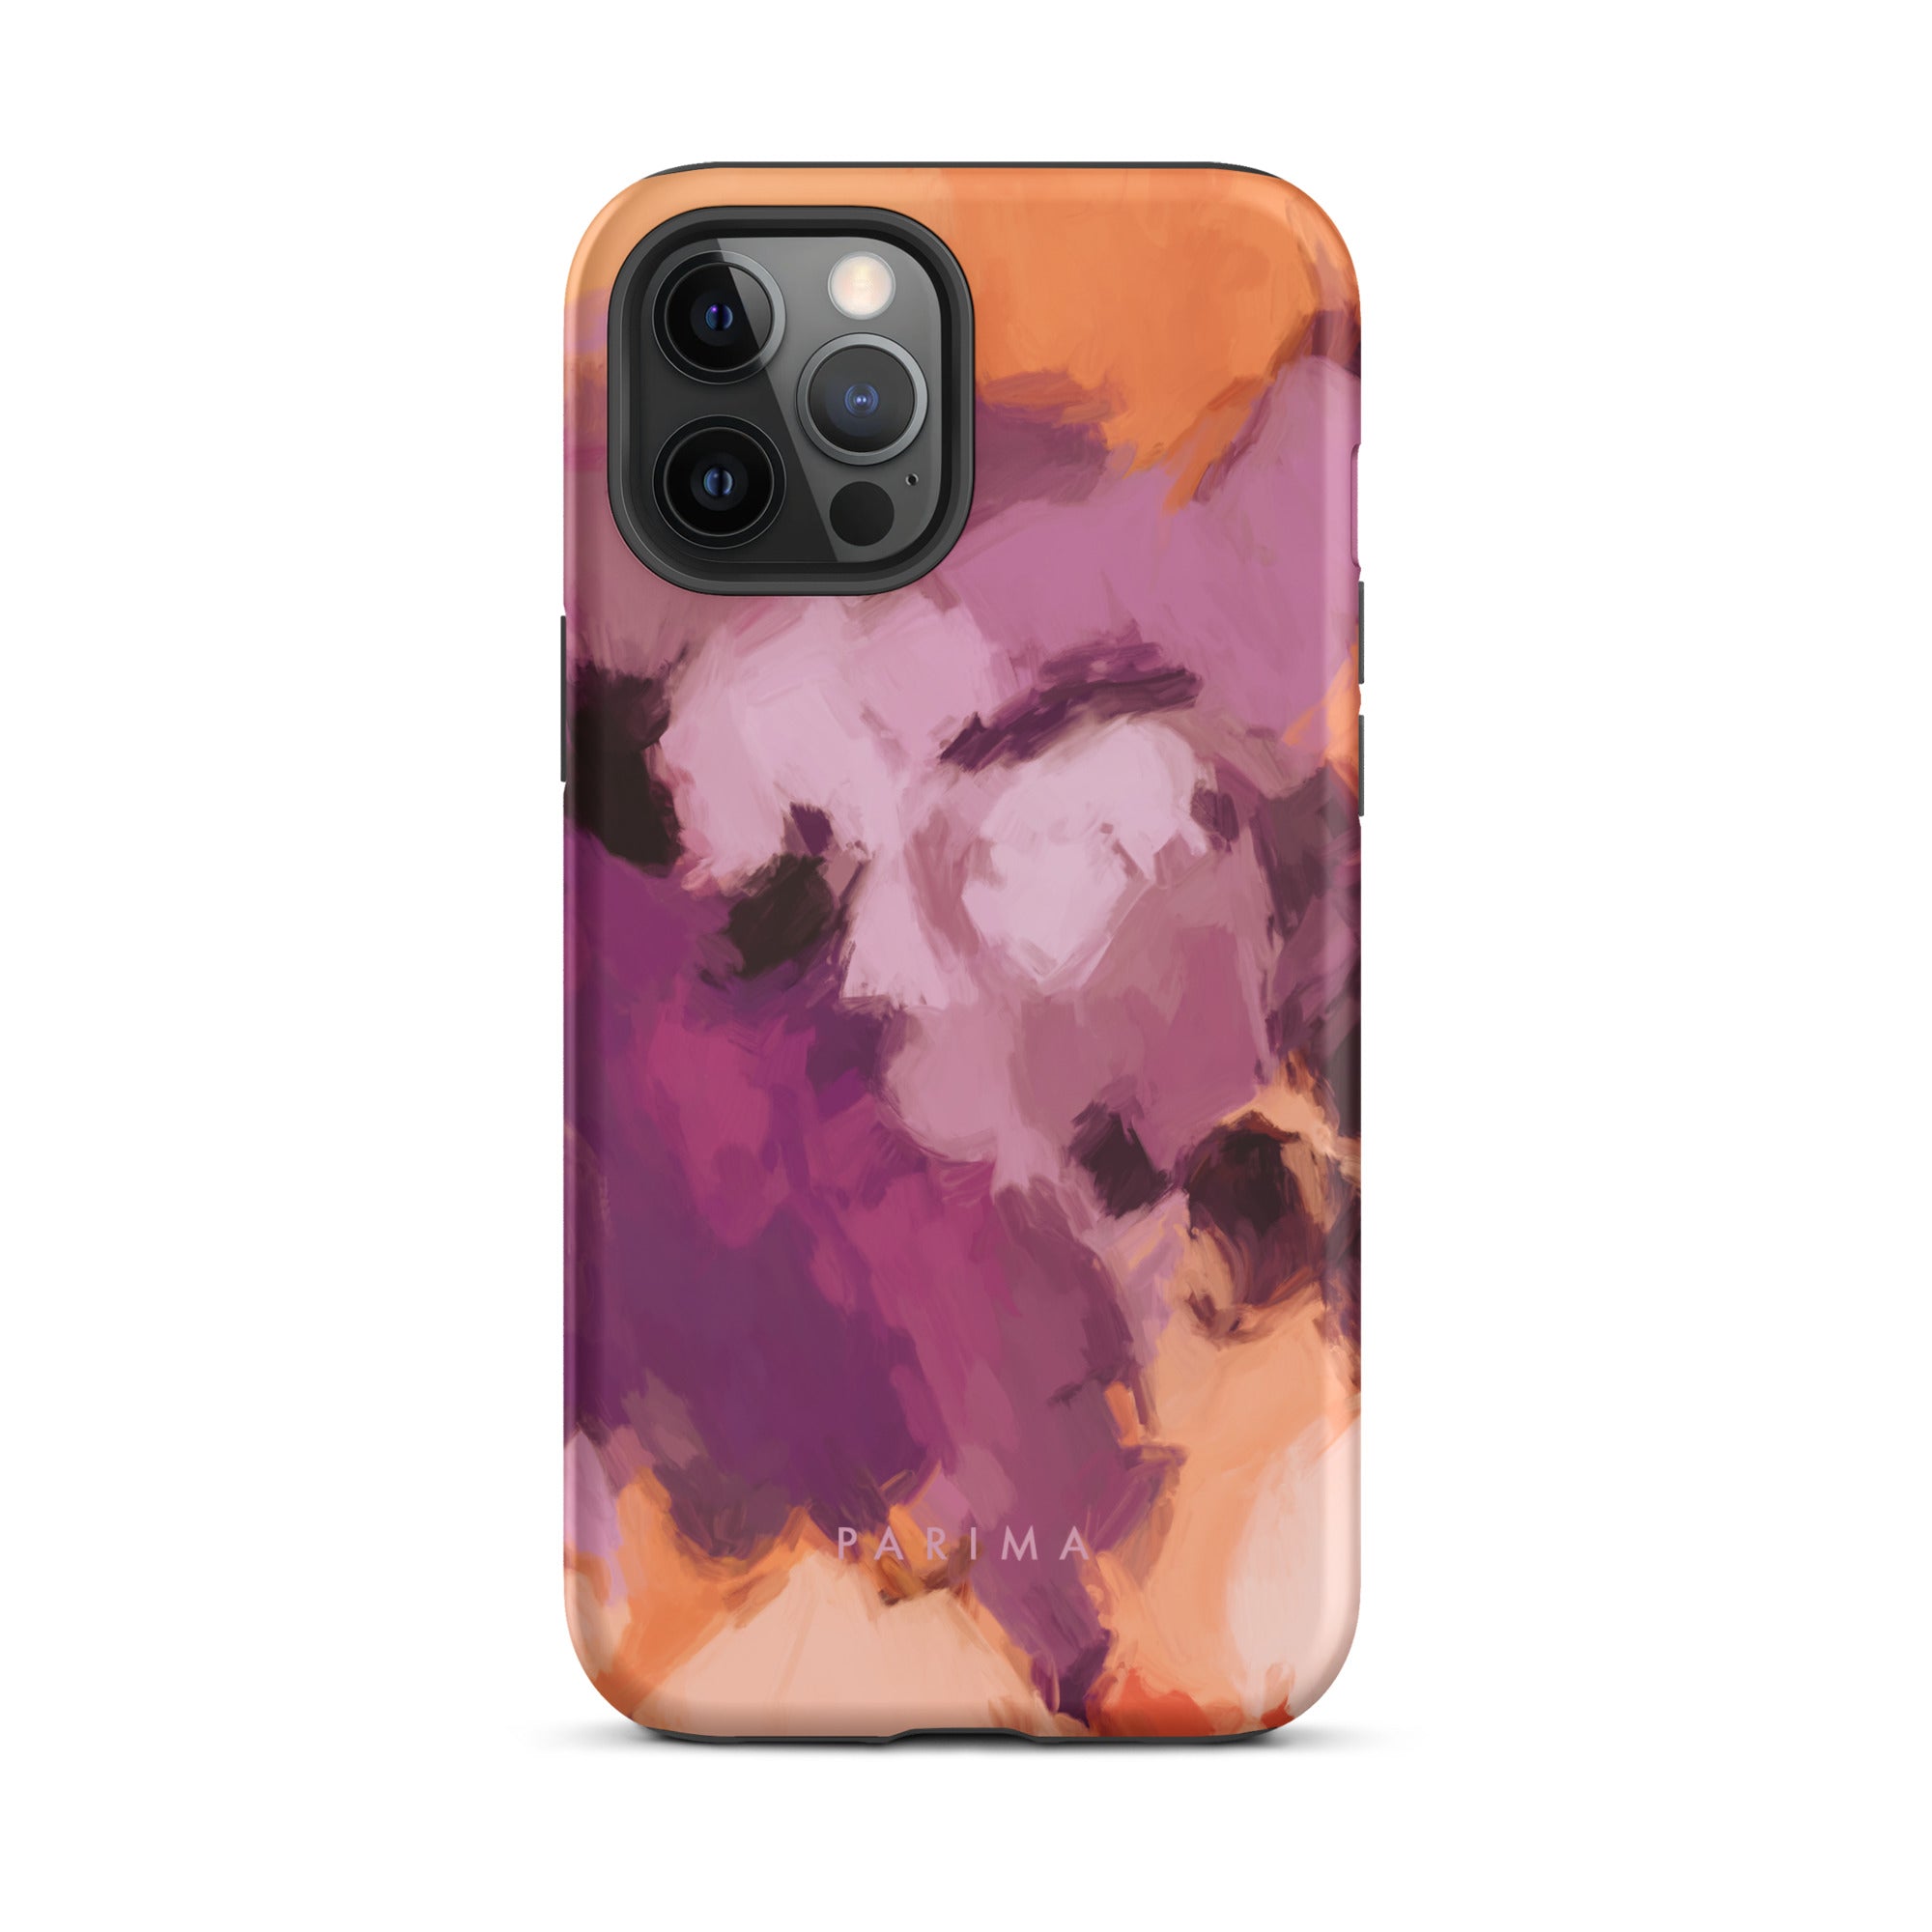 Lilac, purple and orange abstract art on iPhone 12 Pro Max tough case by Parima Studio